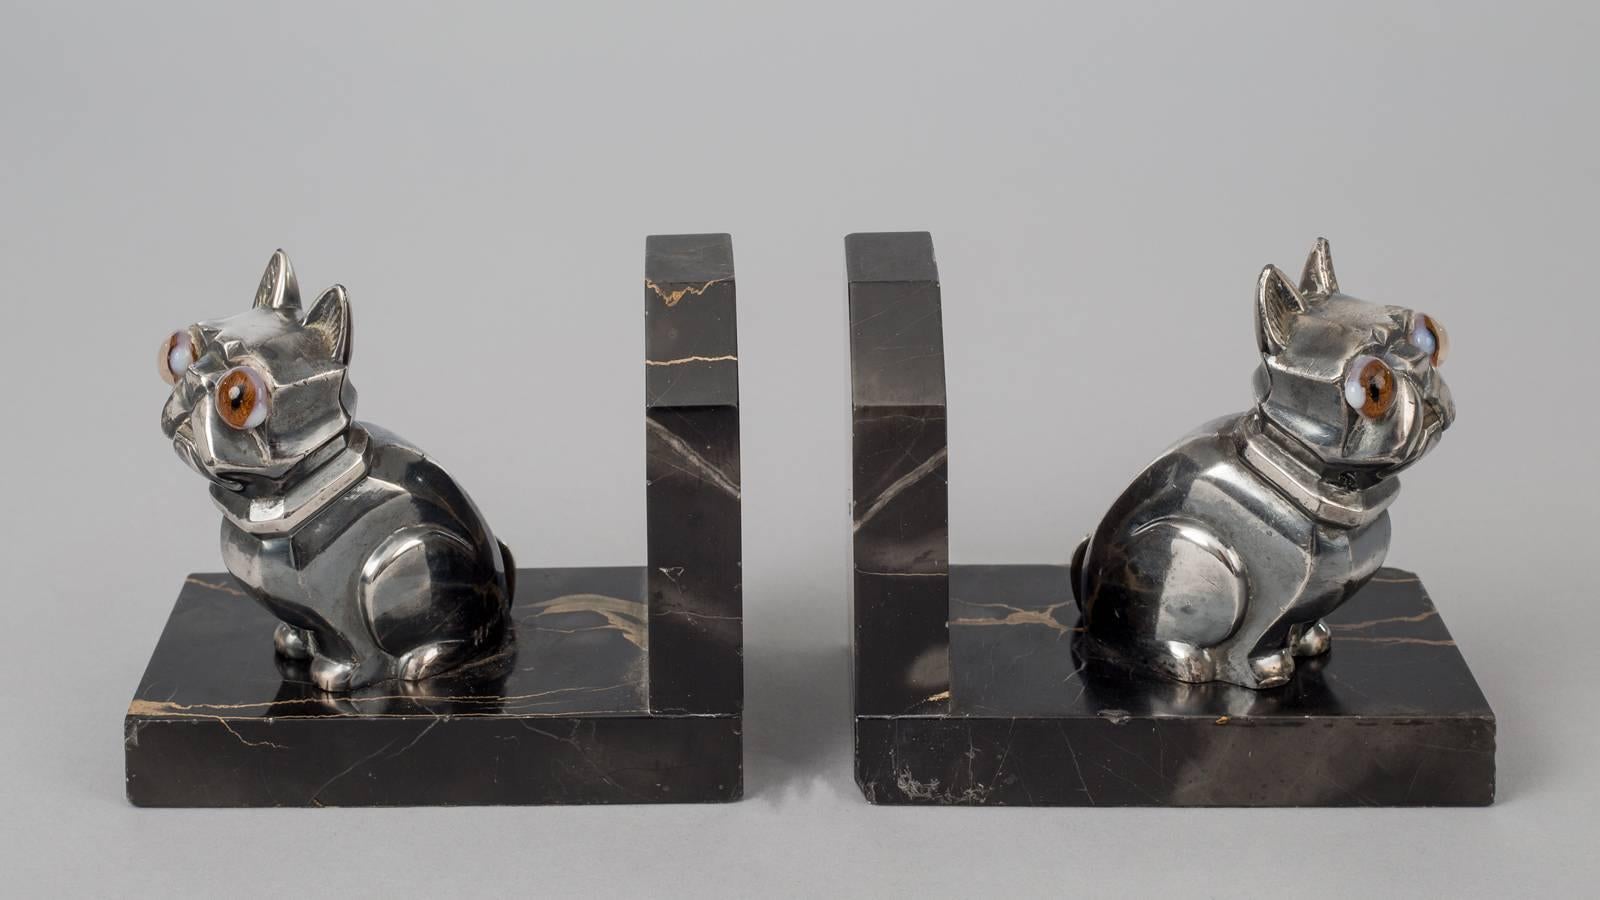 Pair of French Art Deco chromed metal bookends in the form of French bulldogs signed H. Moreau (Hippolyte François Moreau). The dogs have bulging brown glass eyes and are mounted on black marble with gold veins.